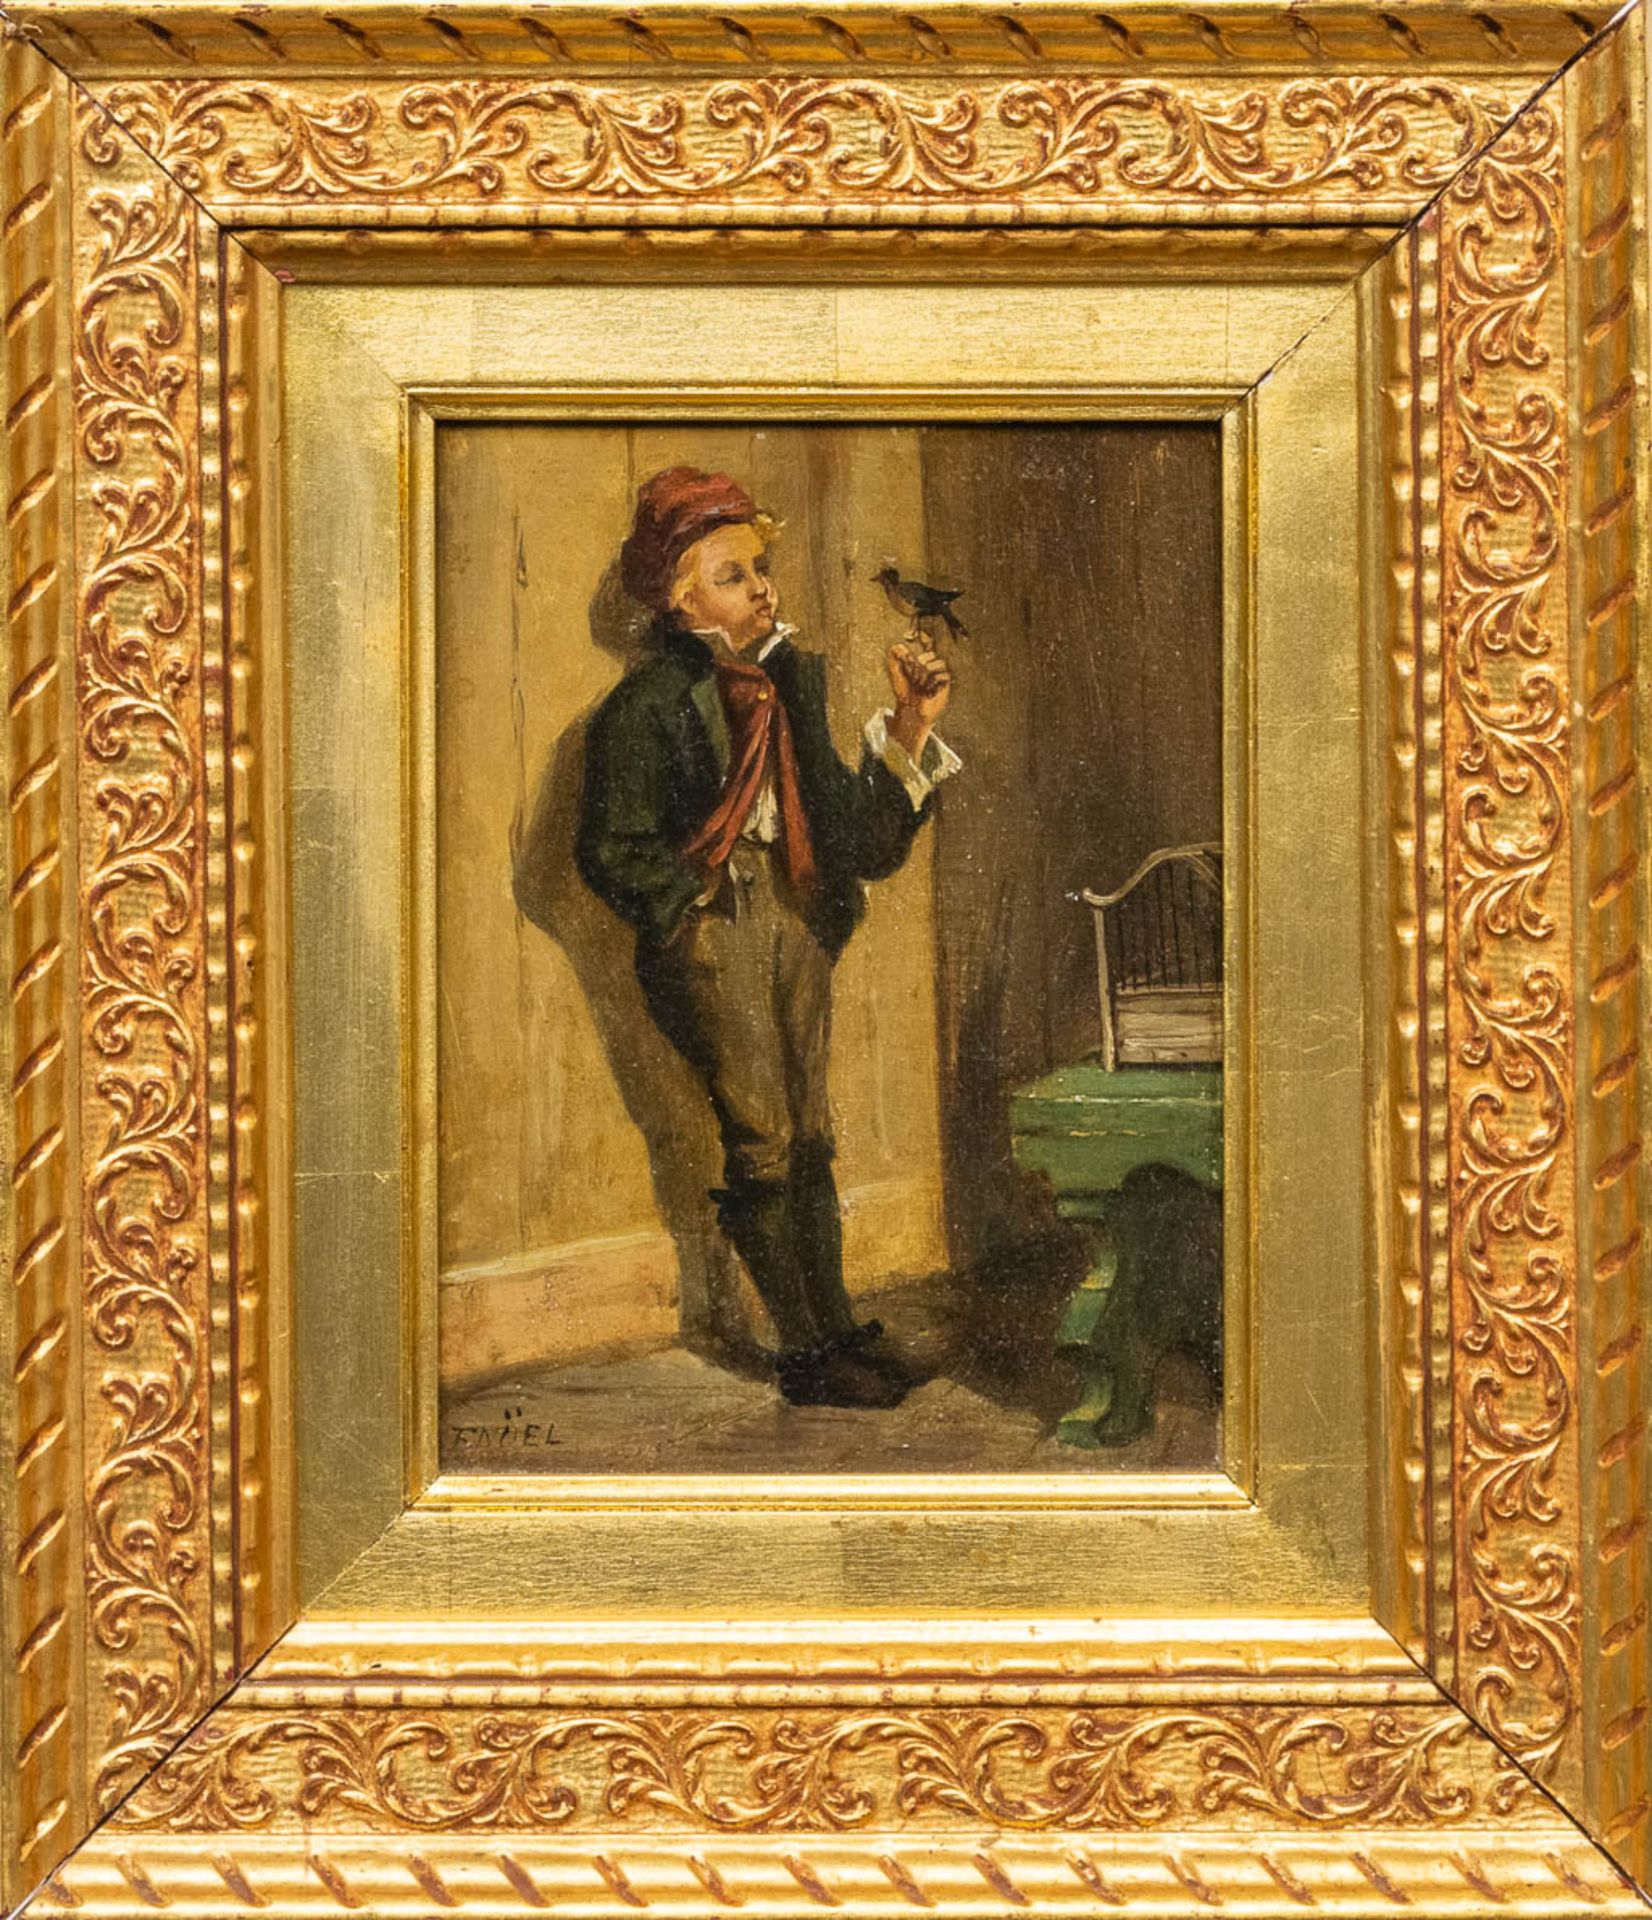 F. NOEL, elegant image of a boy with a bird, oil on panel. (16 x 21 cm) - Image 2 of 6